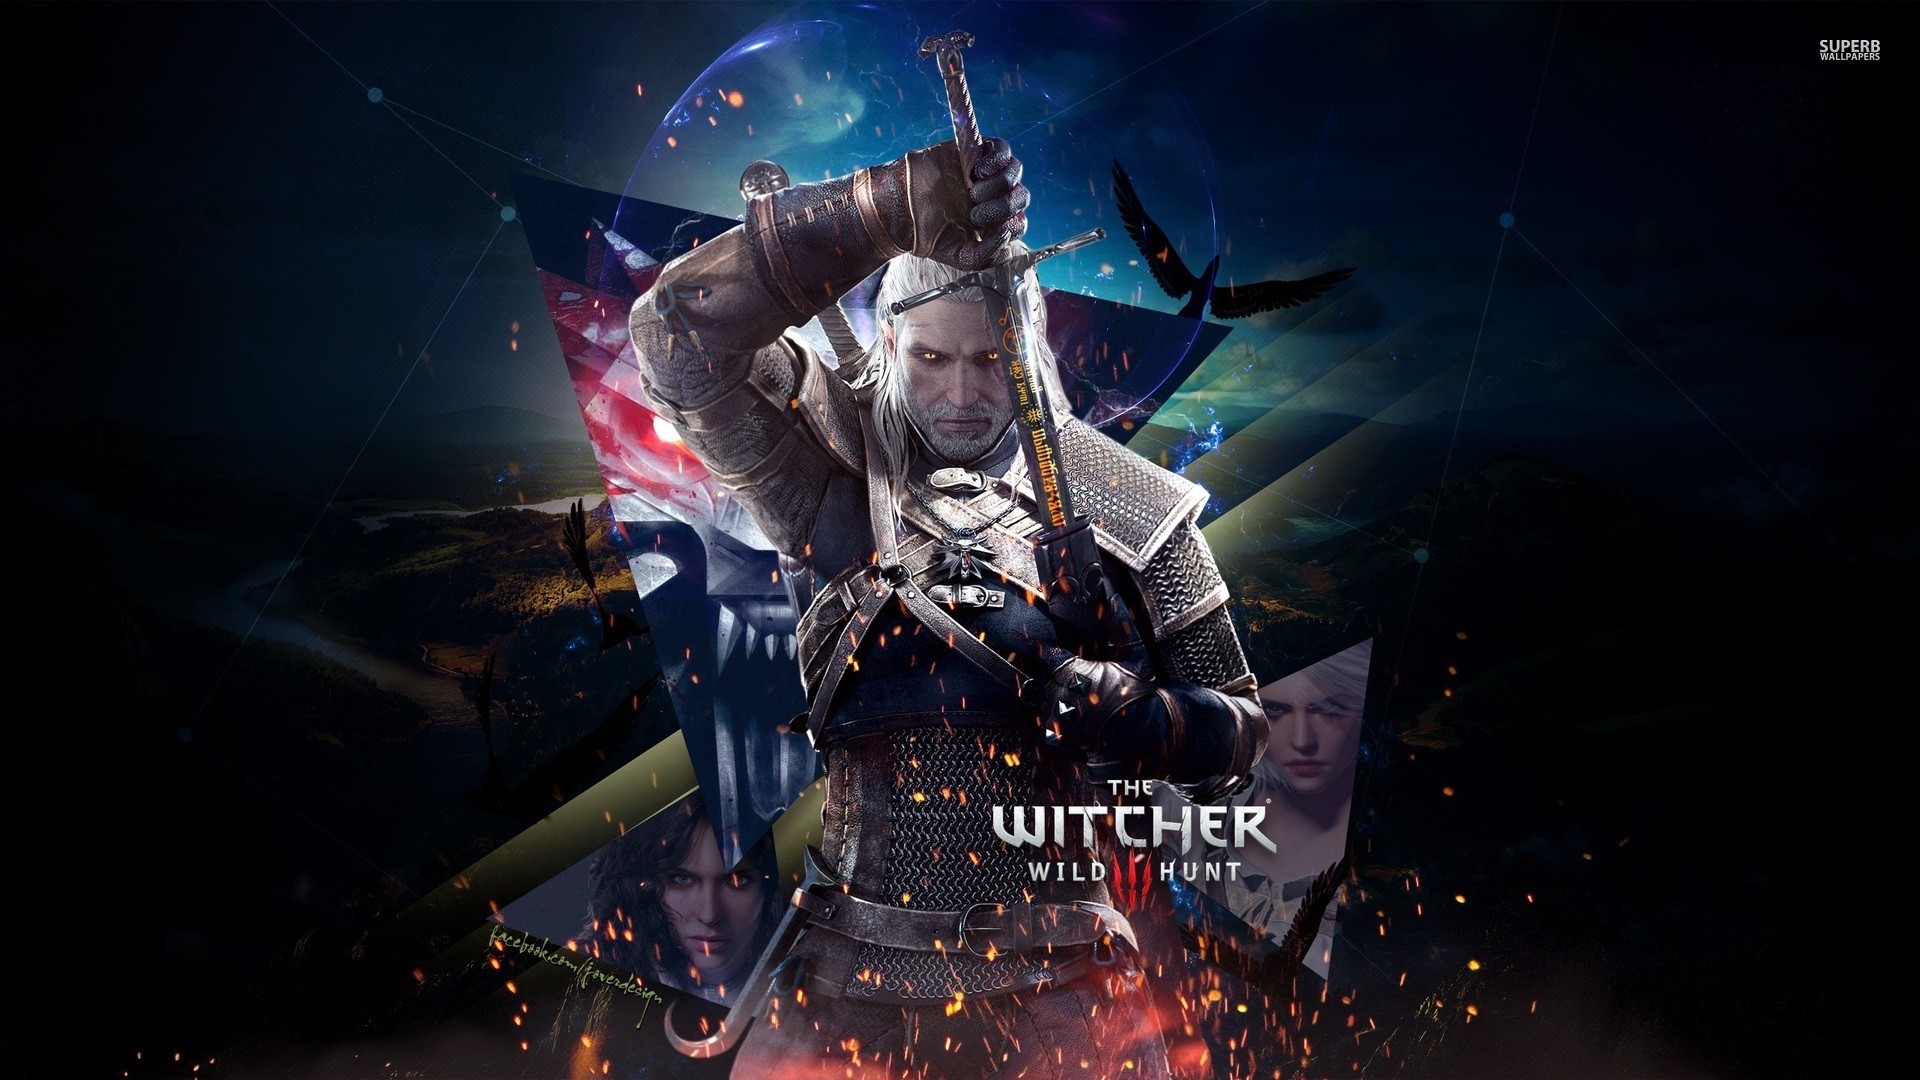 The witcher 3 download pc bittorrent